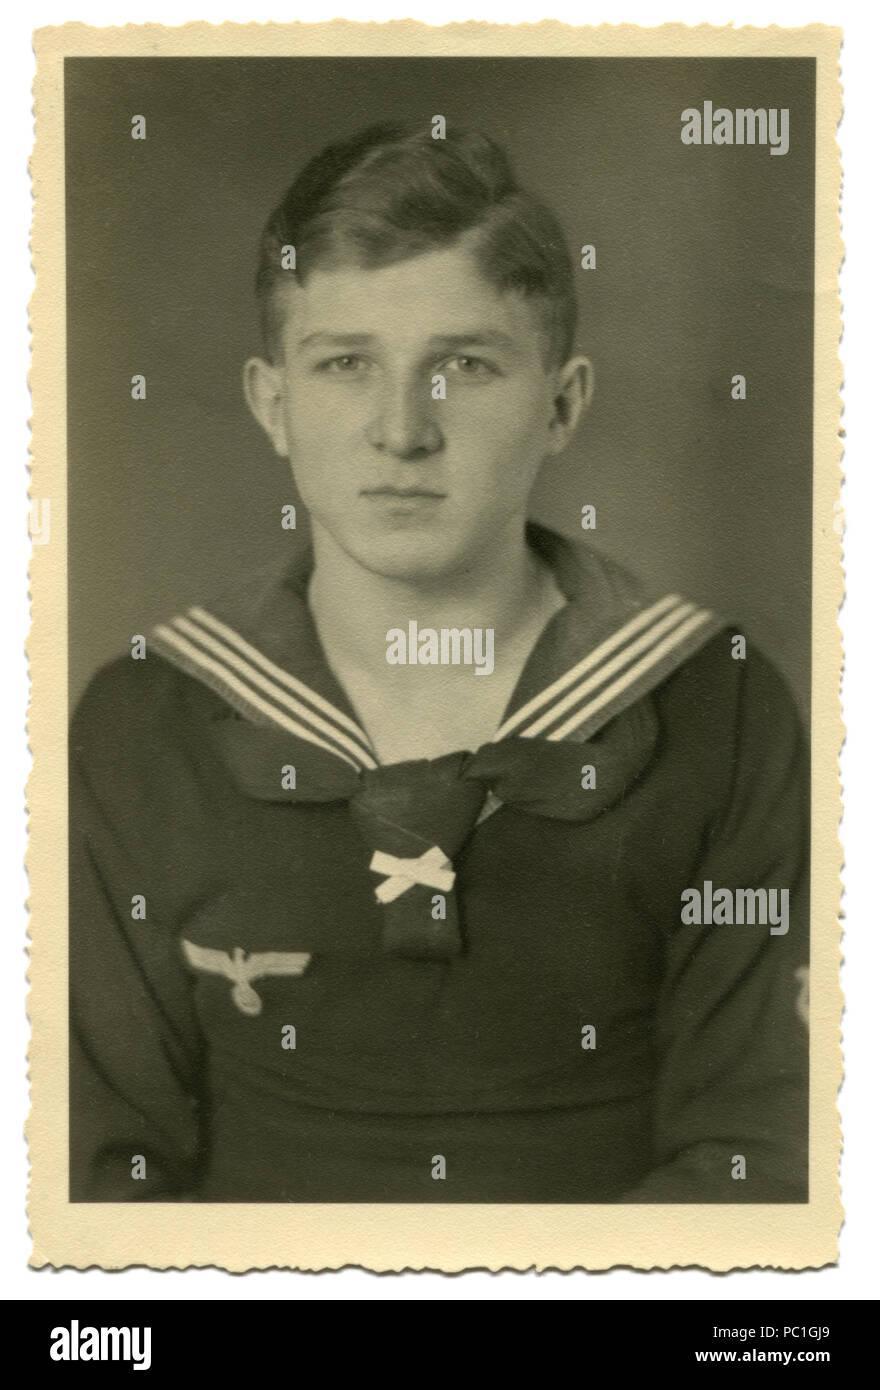 german historical photo: young handsome man, navy sailor in